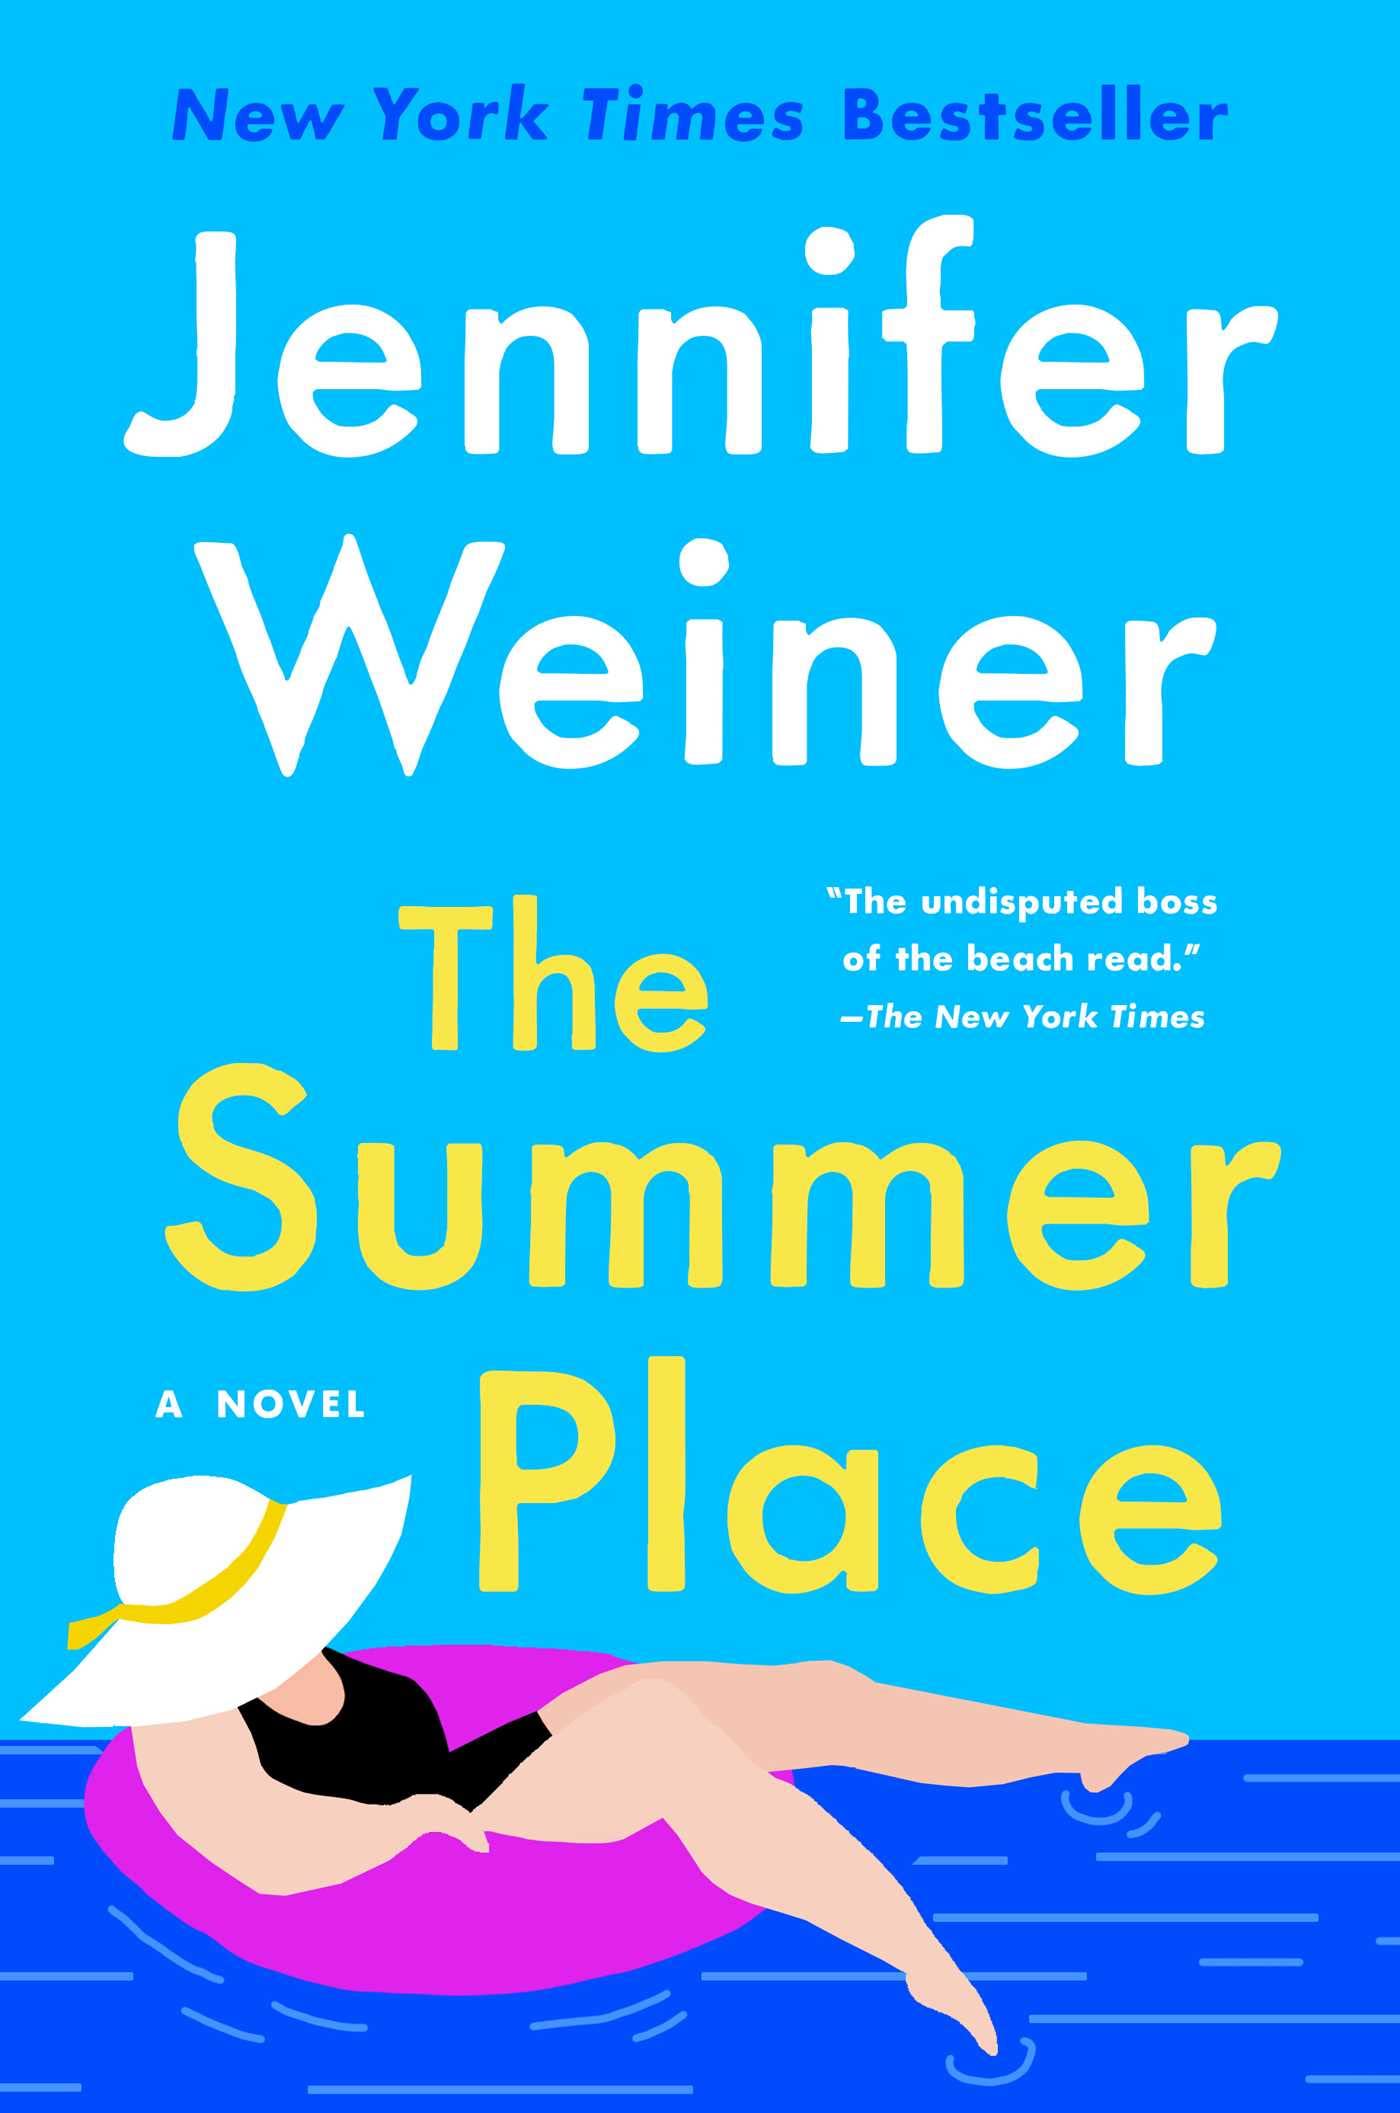 Must Read Books for Summer: The Summer Place